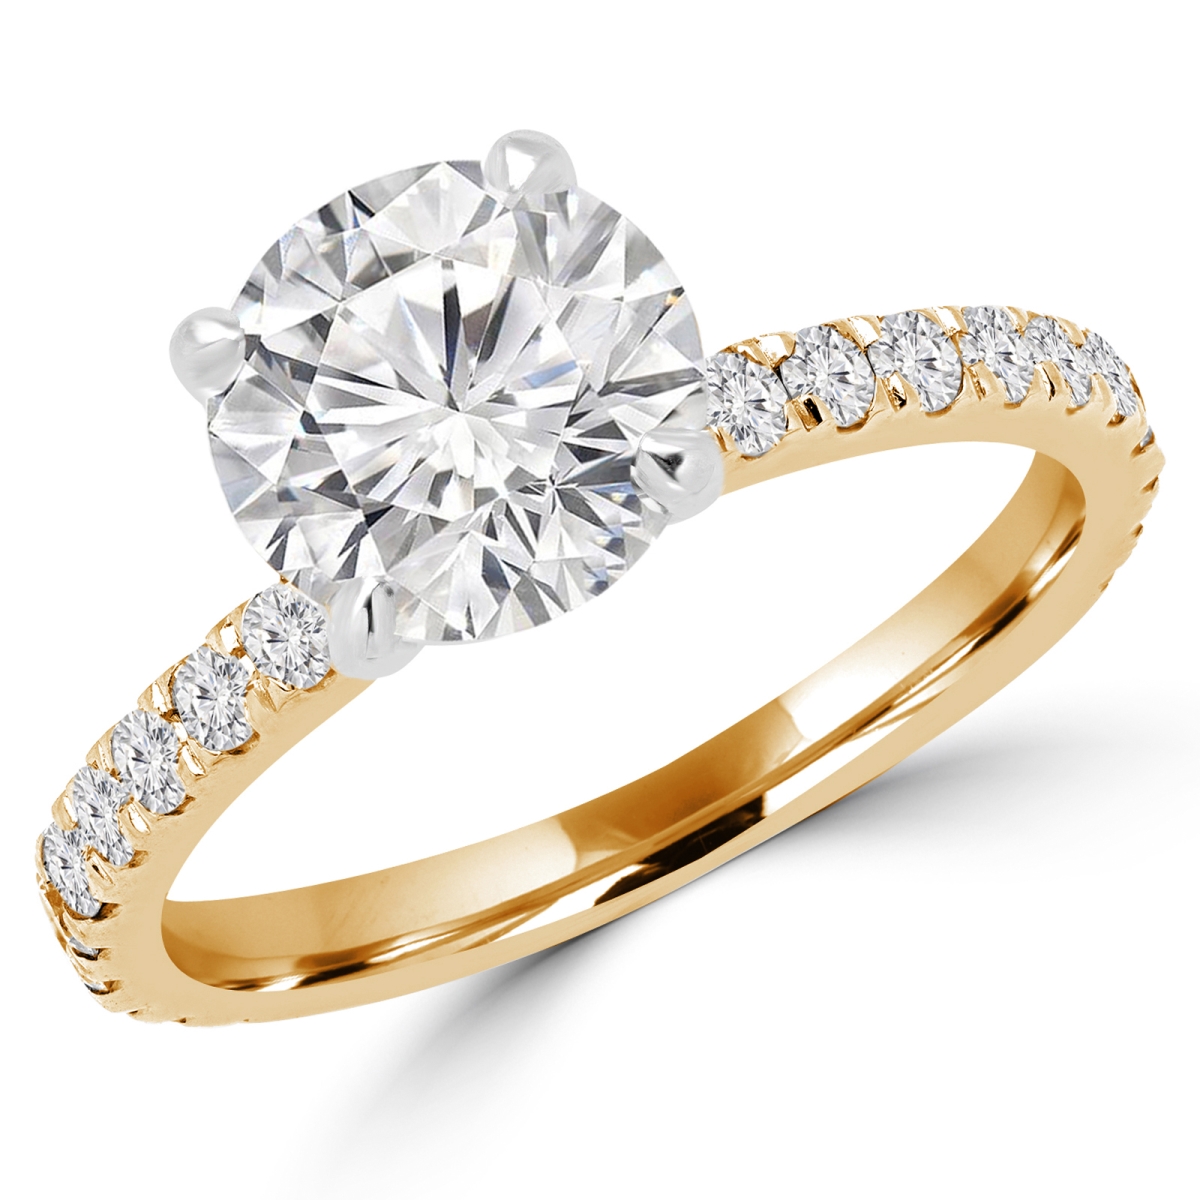 Picture of Majesty Diamonds MD160340-3 1 CTW Round Cut Diamond Multi Stone Engagement Ring in 14K Yellow Gold - Size 3